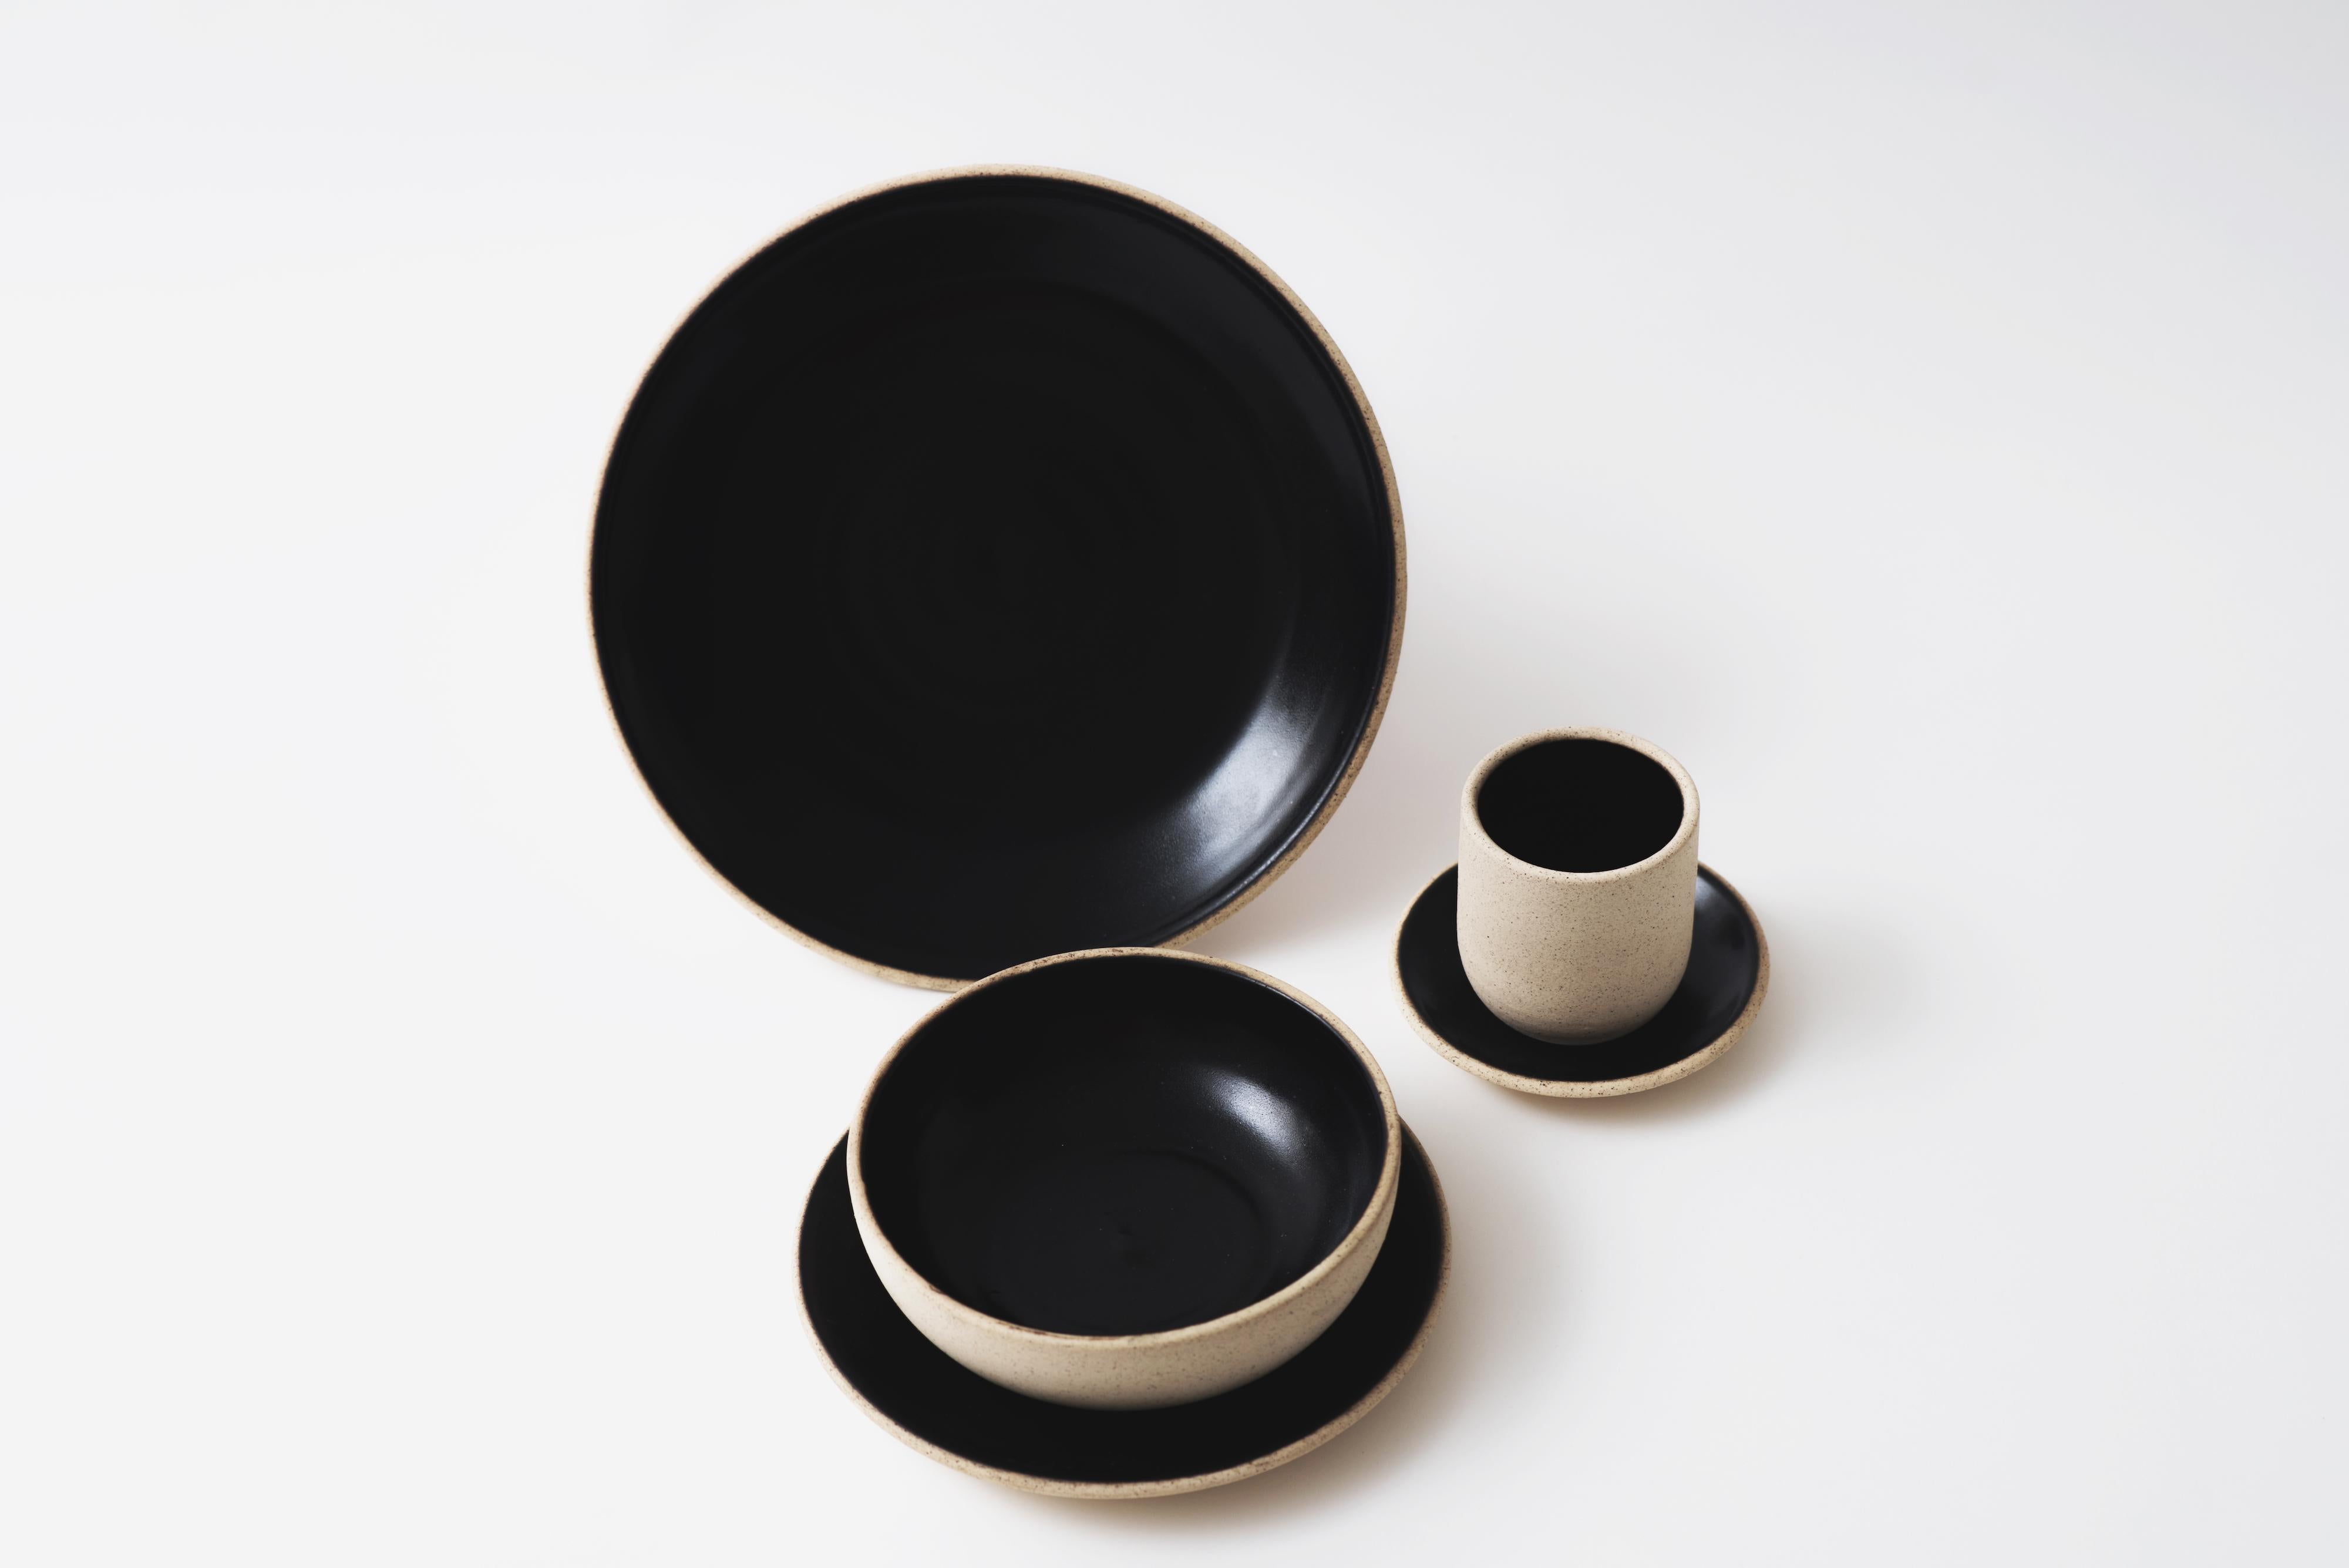 Mexican Handmade Ceramic Stoneware Dinner Plate in Black Obsidian and Natural, in Stock